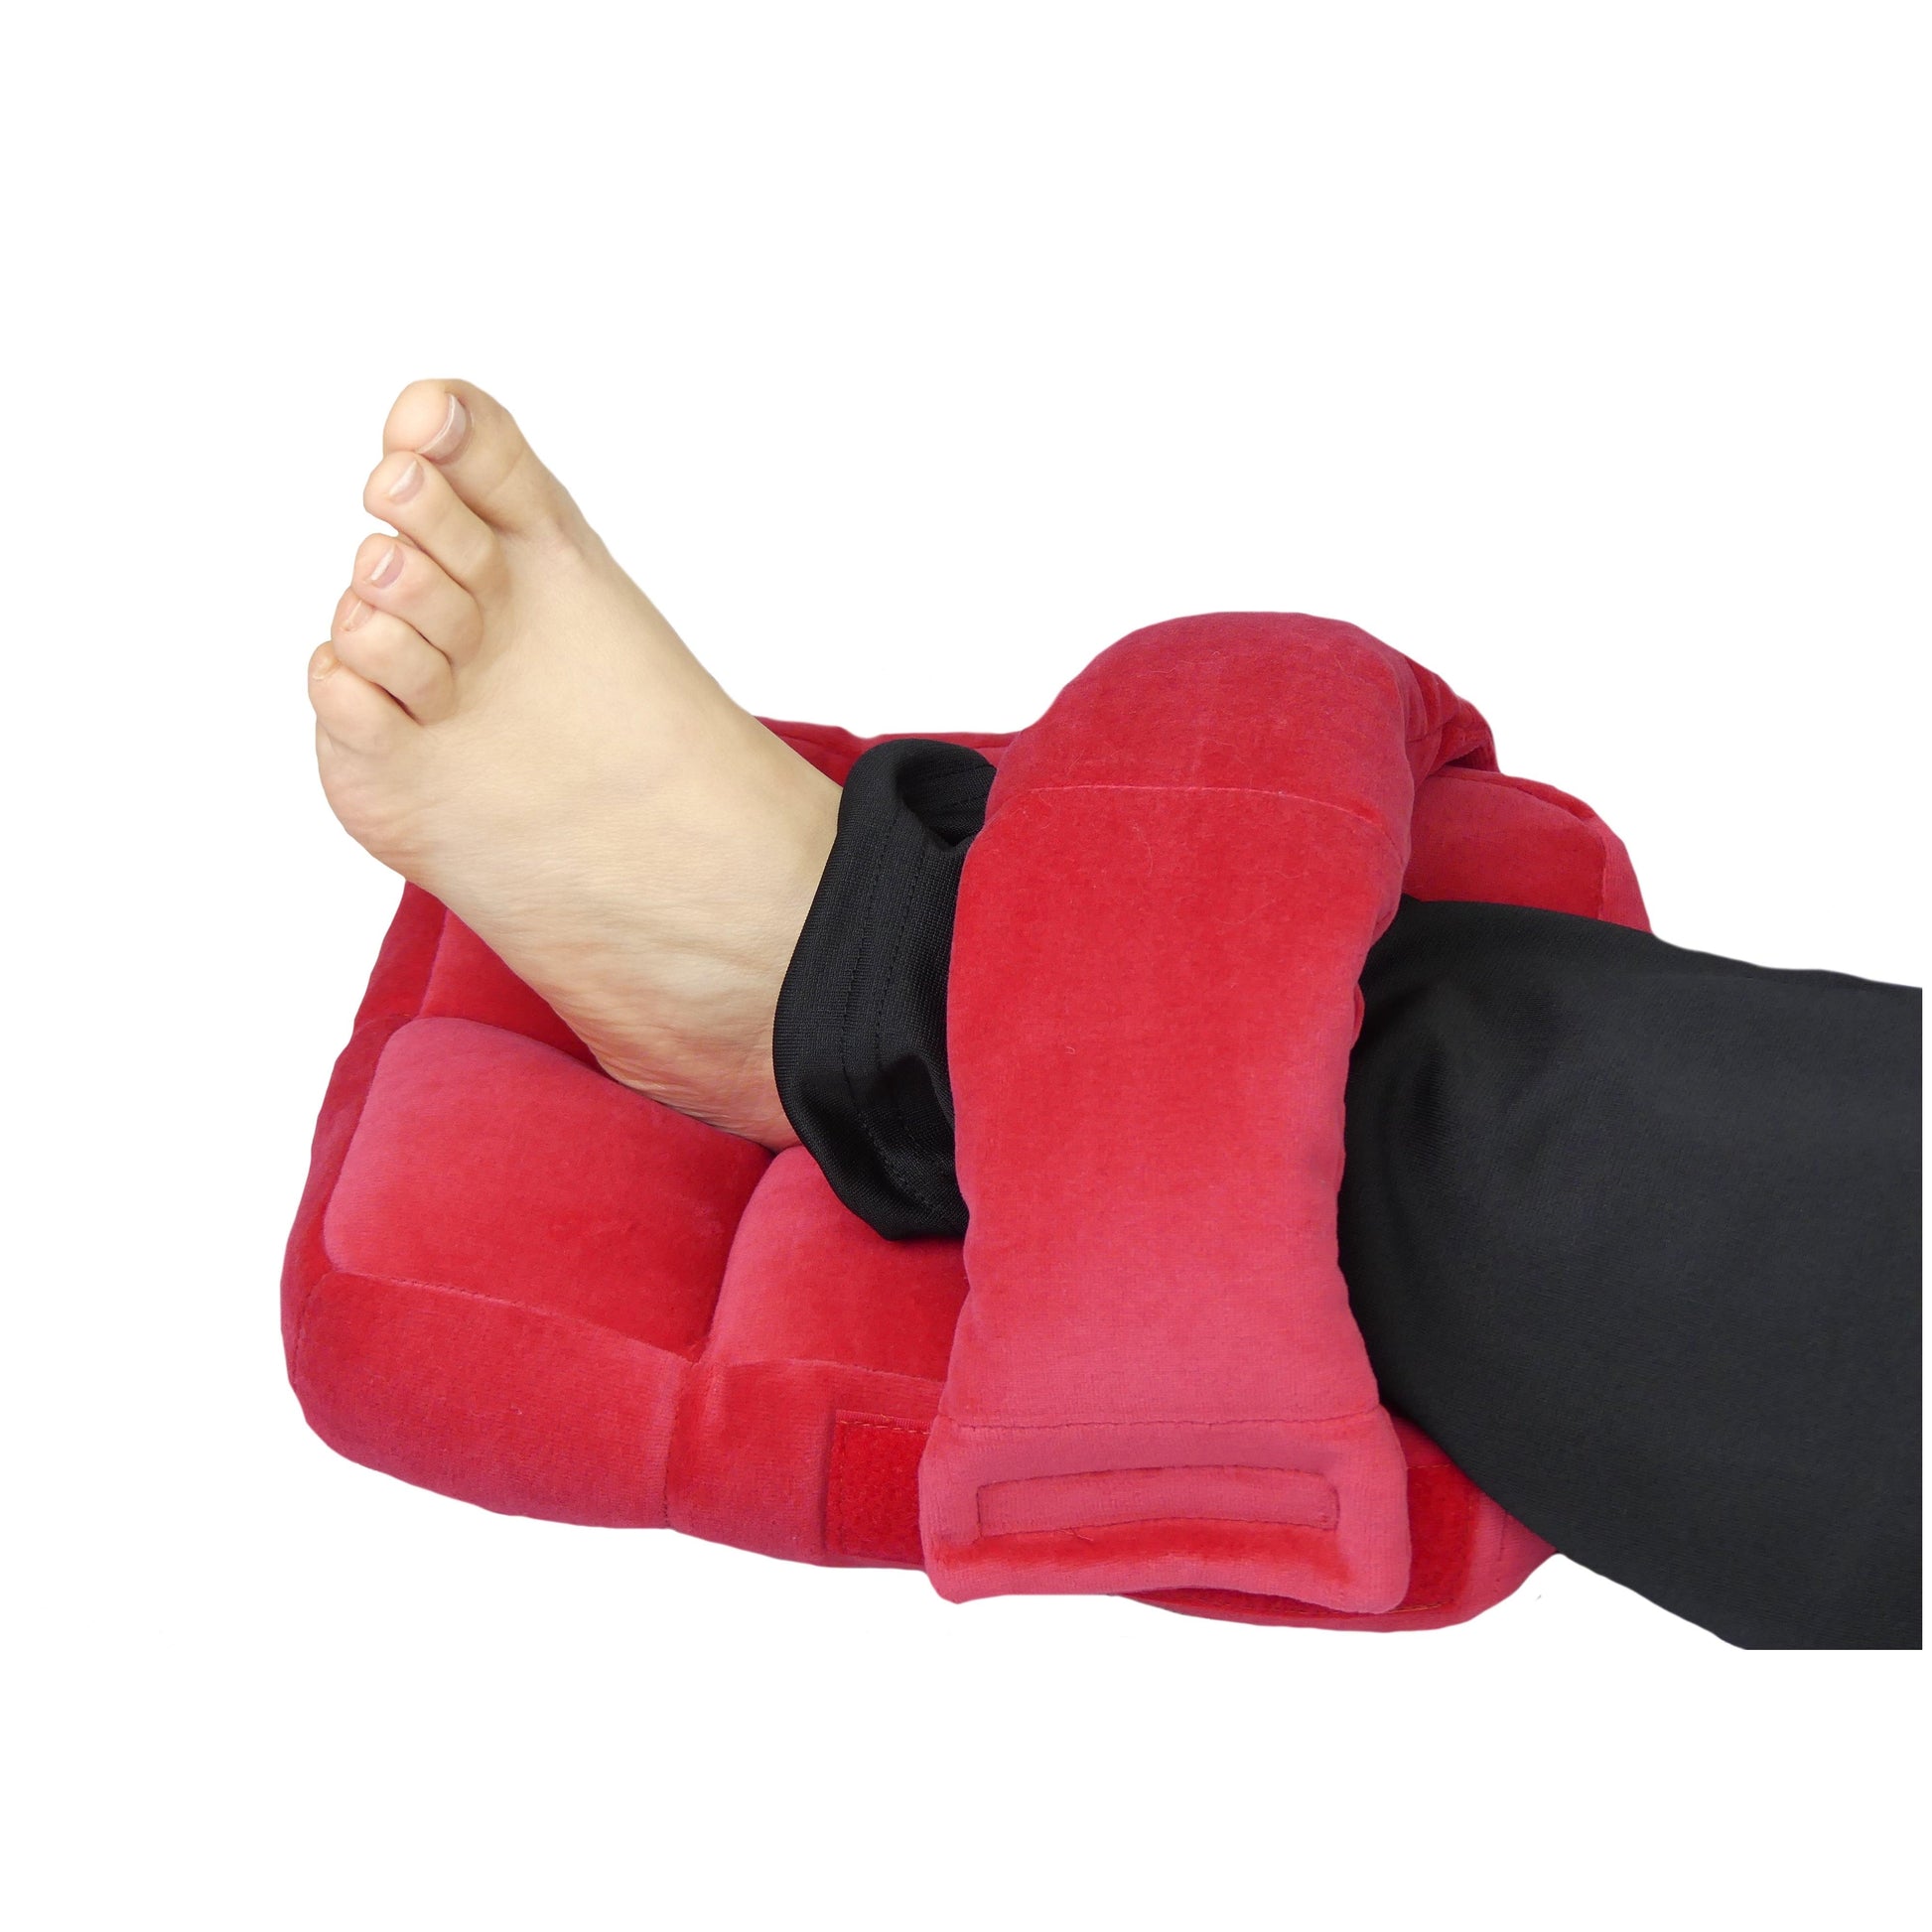 Positioning and Pressure Care: 6-Chamber Heel Support Cushion - M061 - MEDORIS